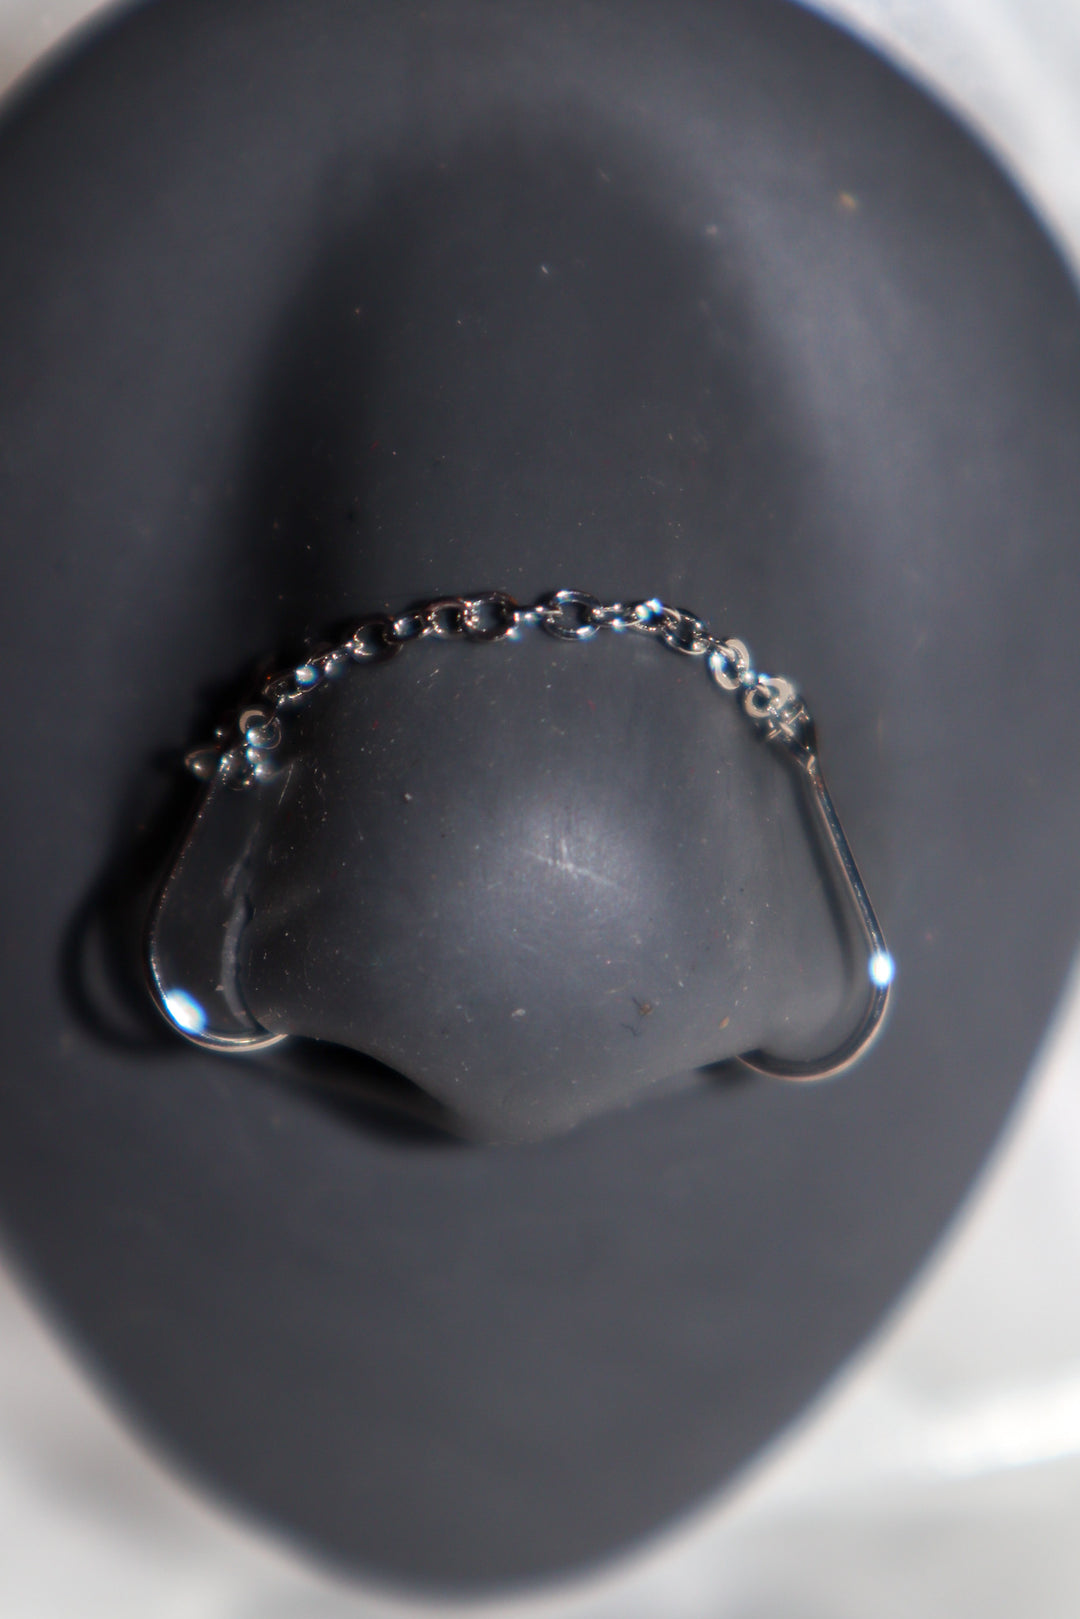 Connected Silver Nose Chain Cuff